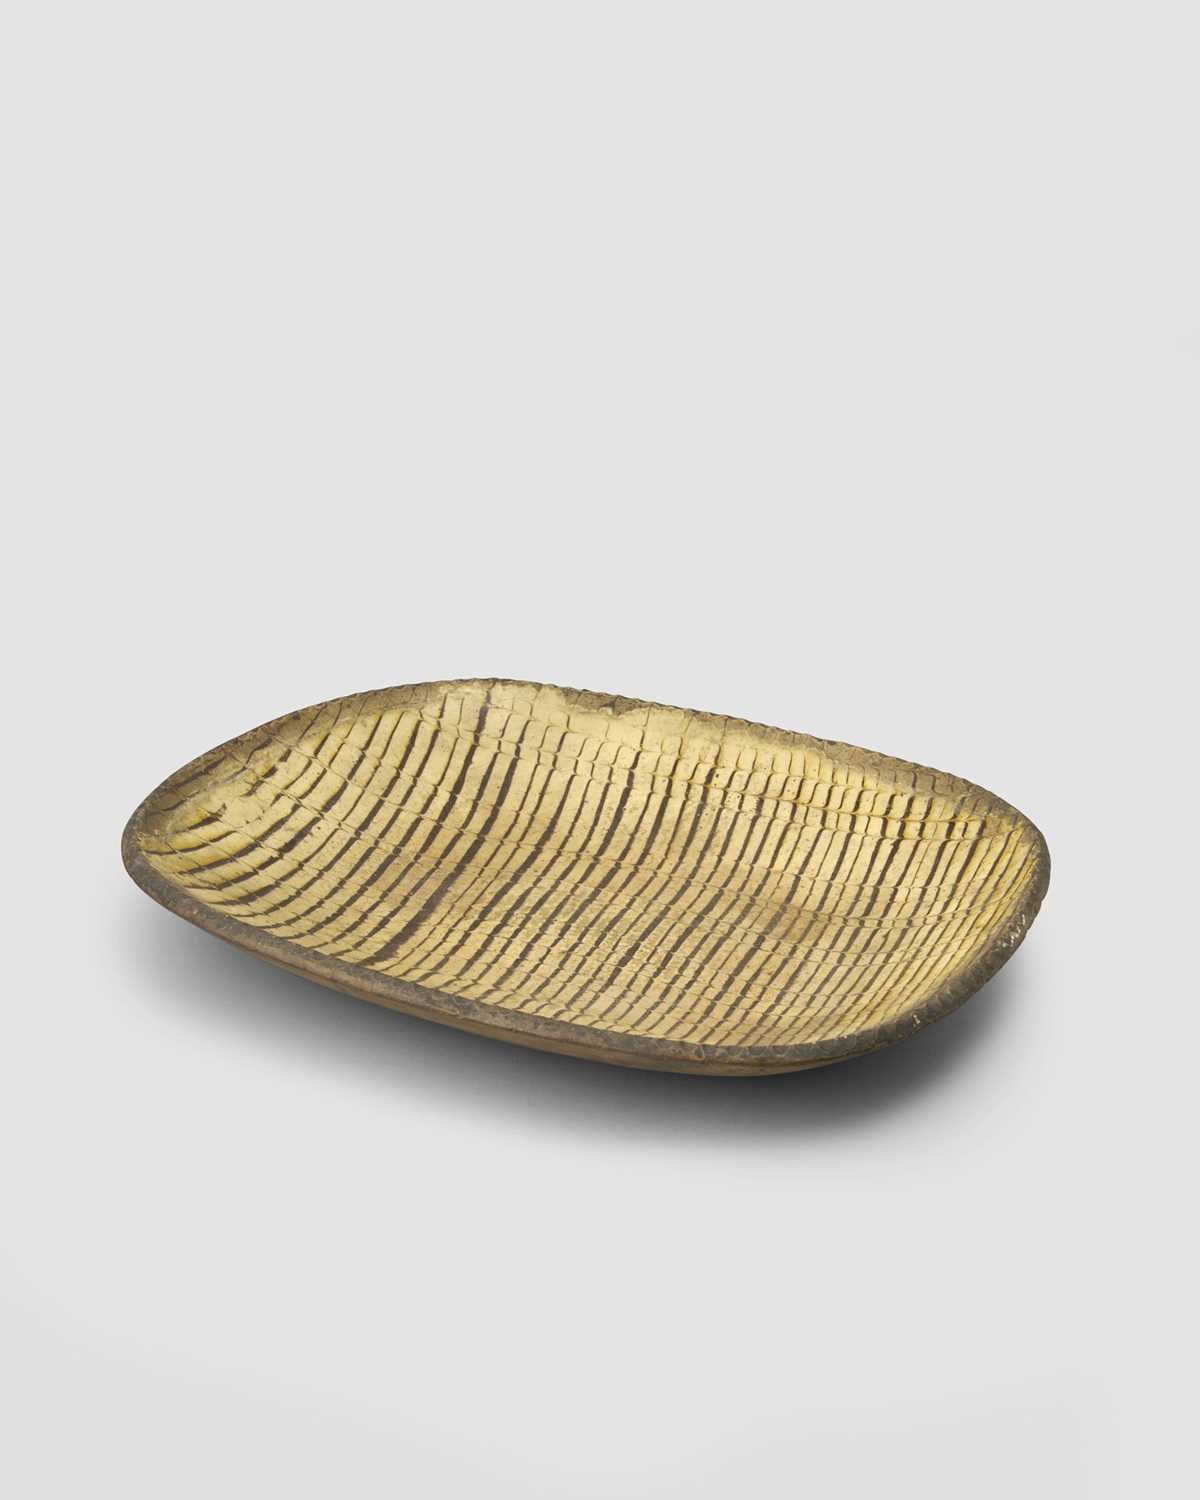 A large Isleworth combed slipware dish, 18th century, the shallow oblong form decorated with a cream